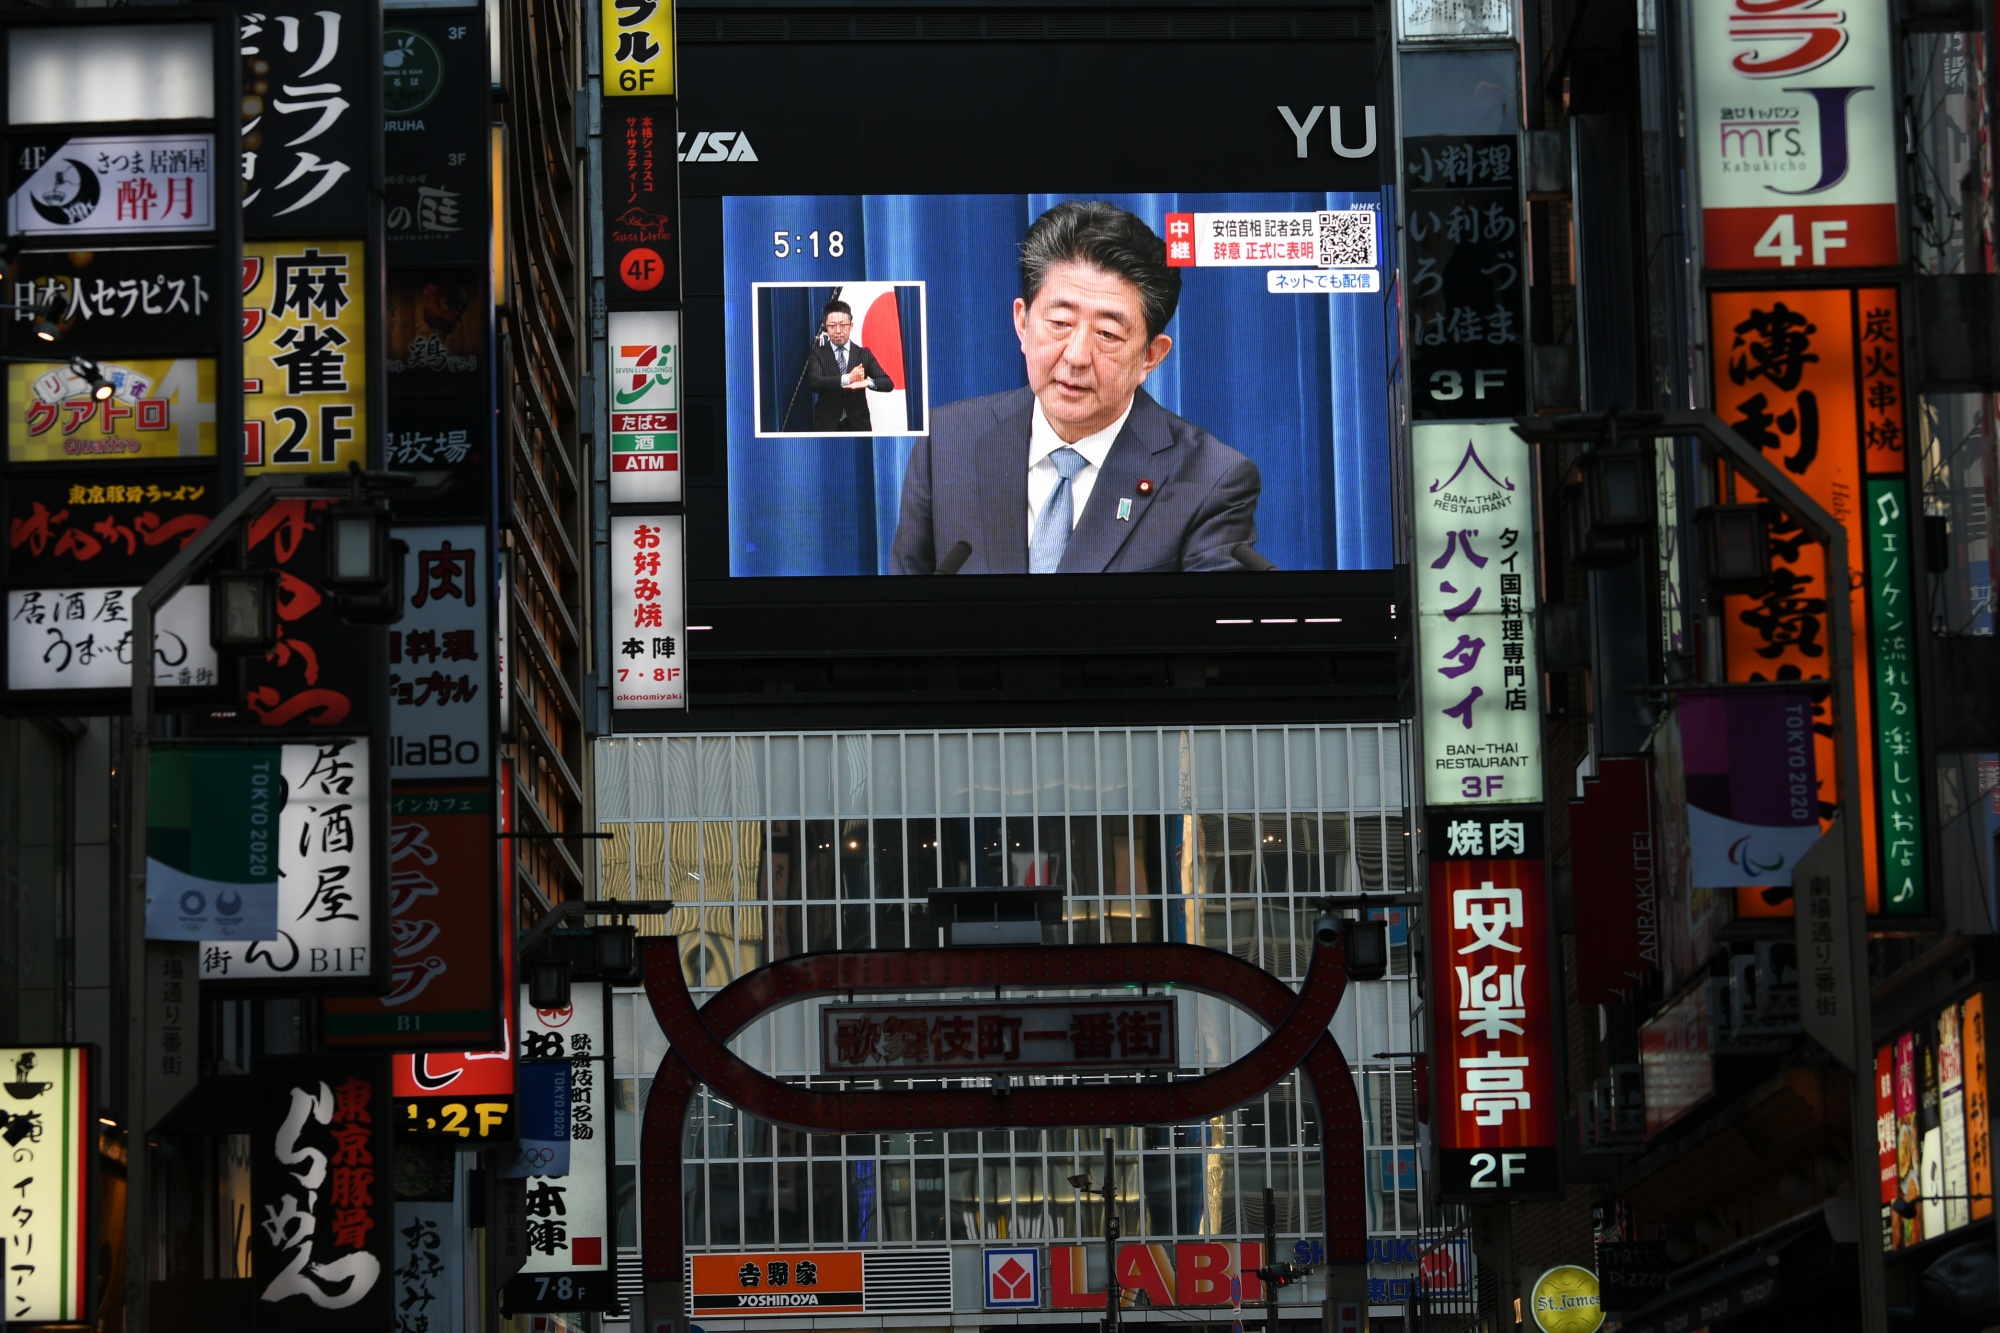 Shinzo Abe speaking at a news conference in Tokyo, Aug. 28